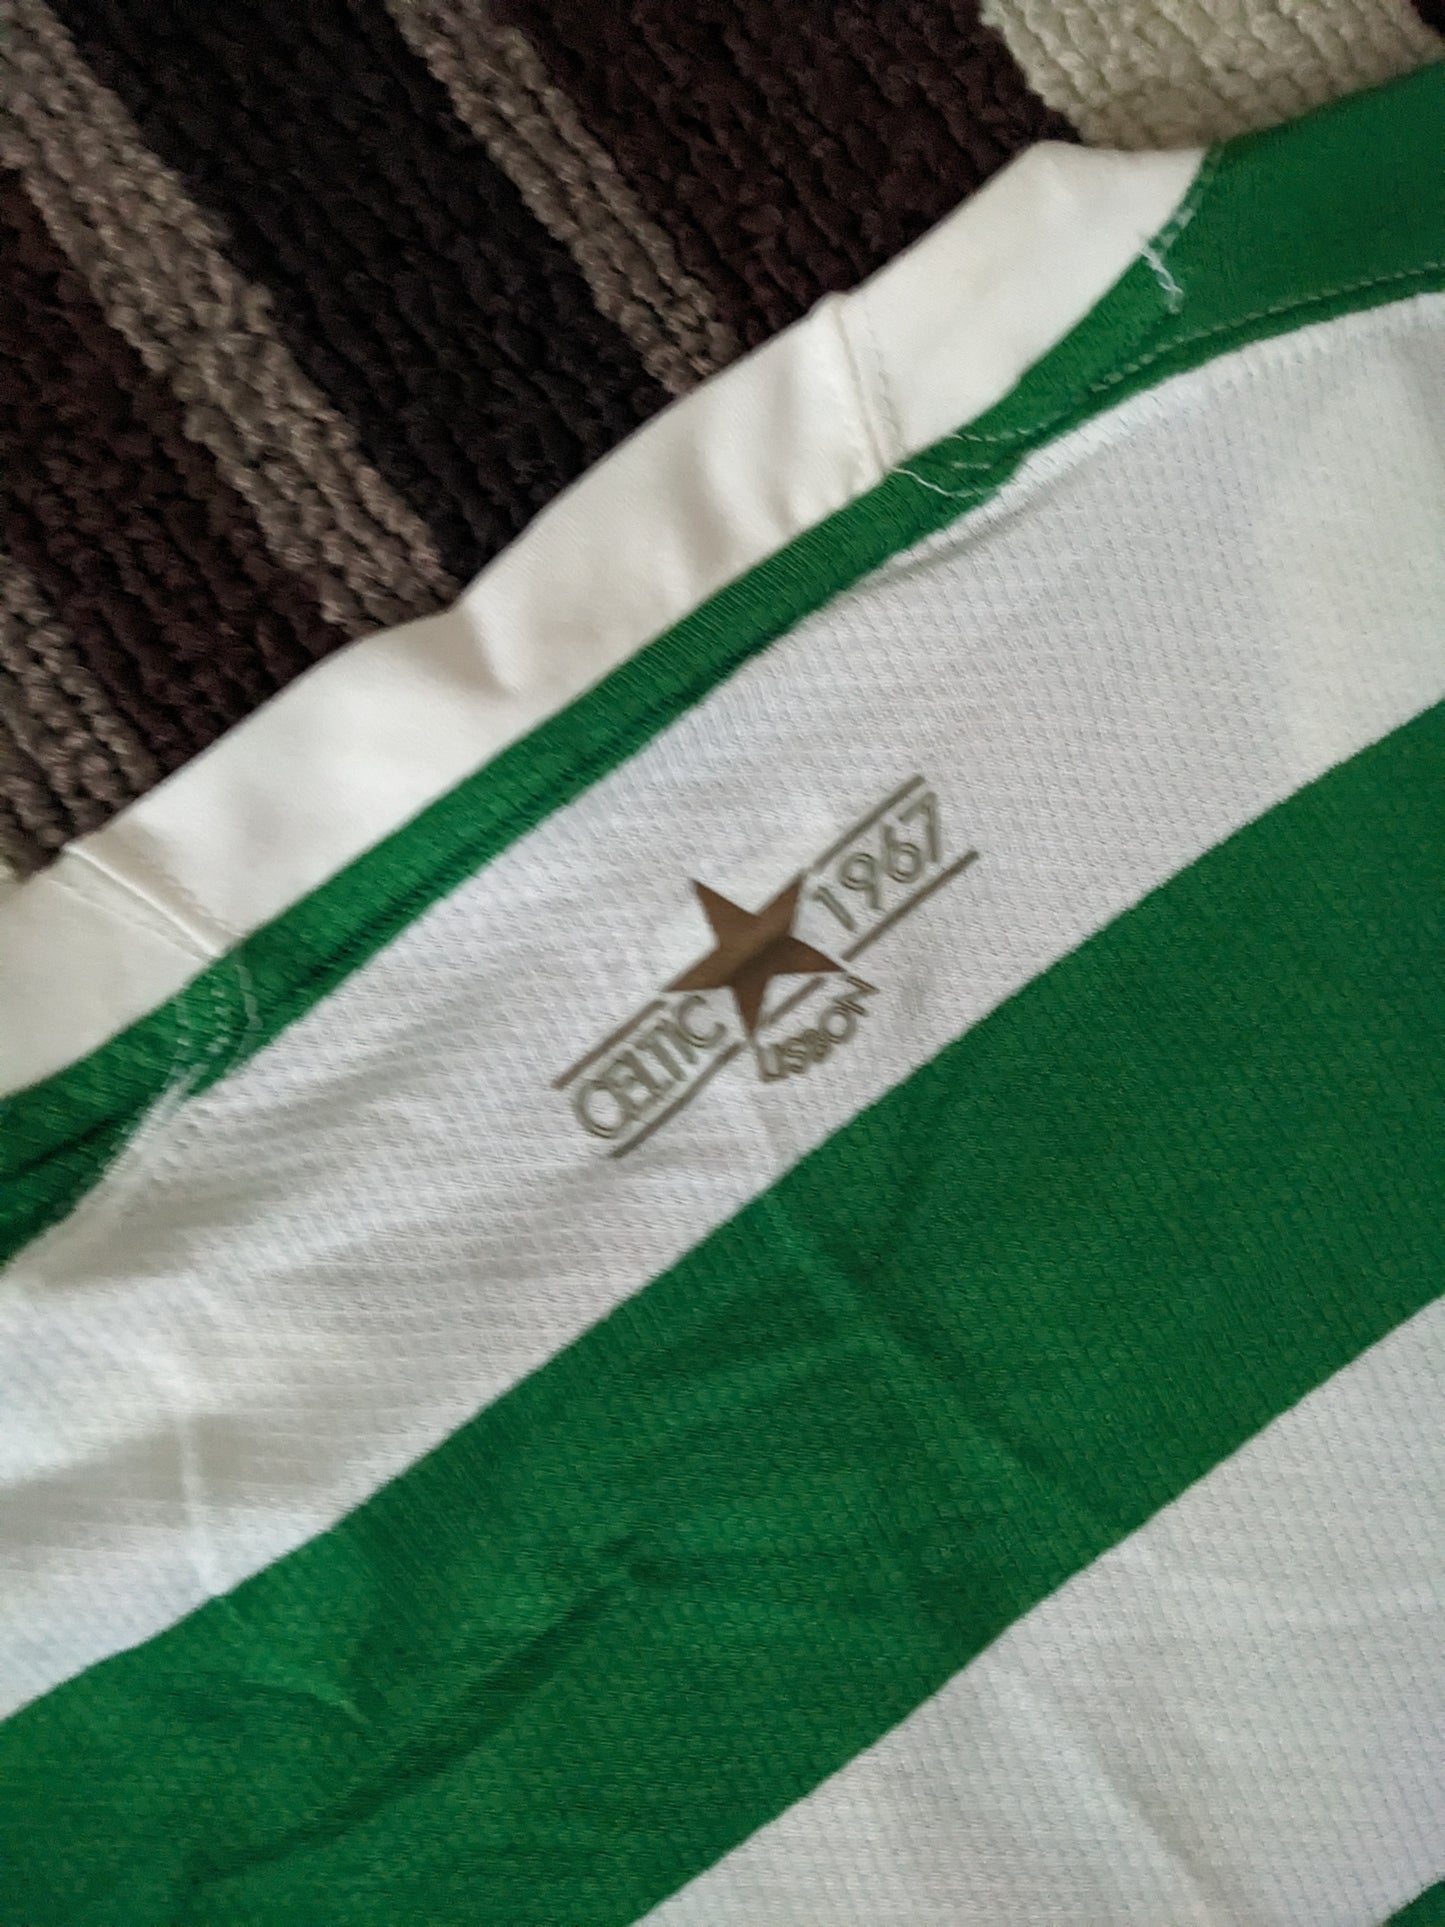 Celtic Scotland home (YOUTH M) *BRAND NEW WITH TAGS